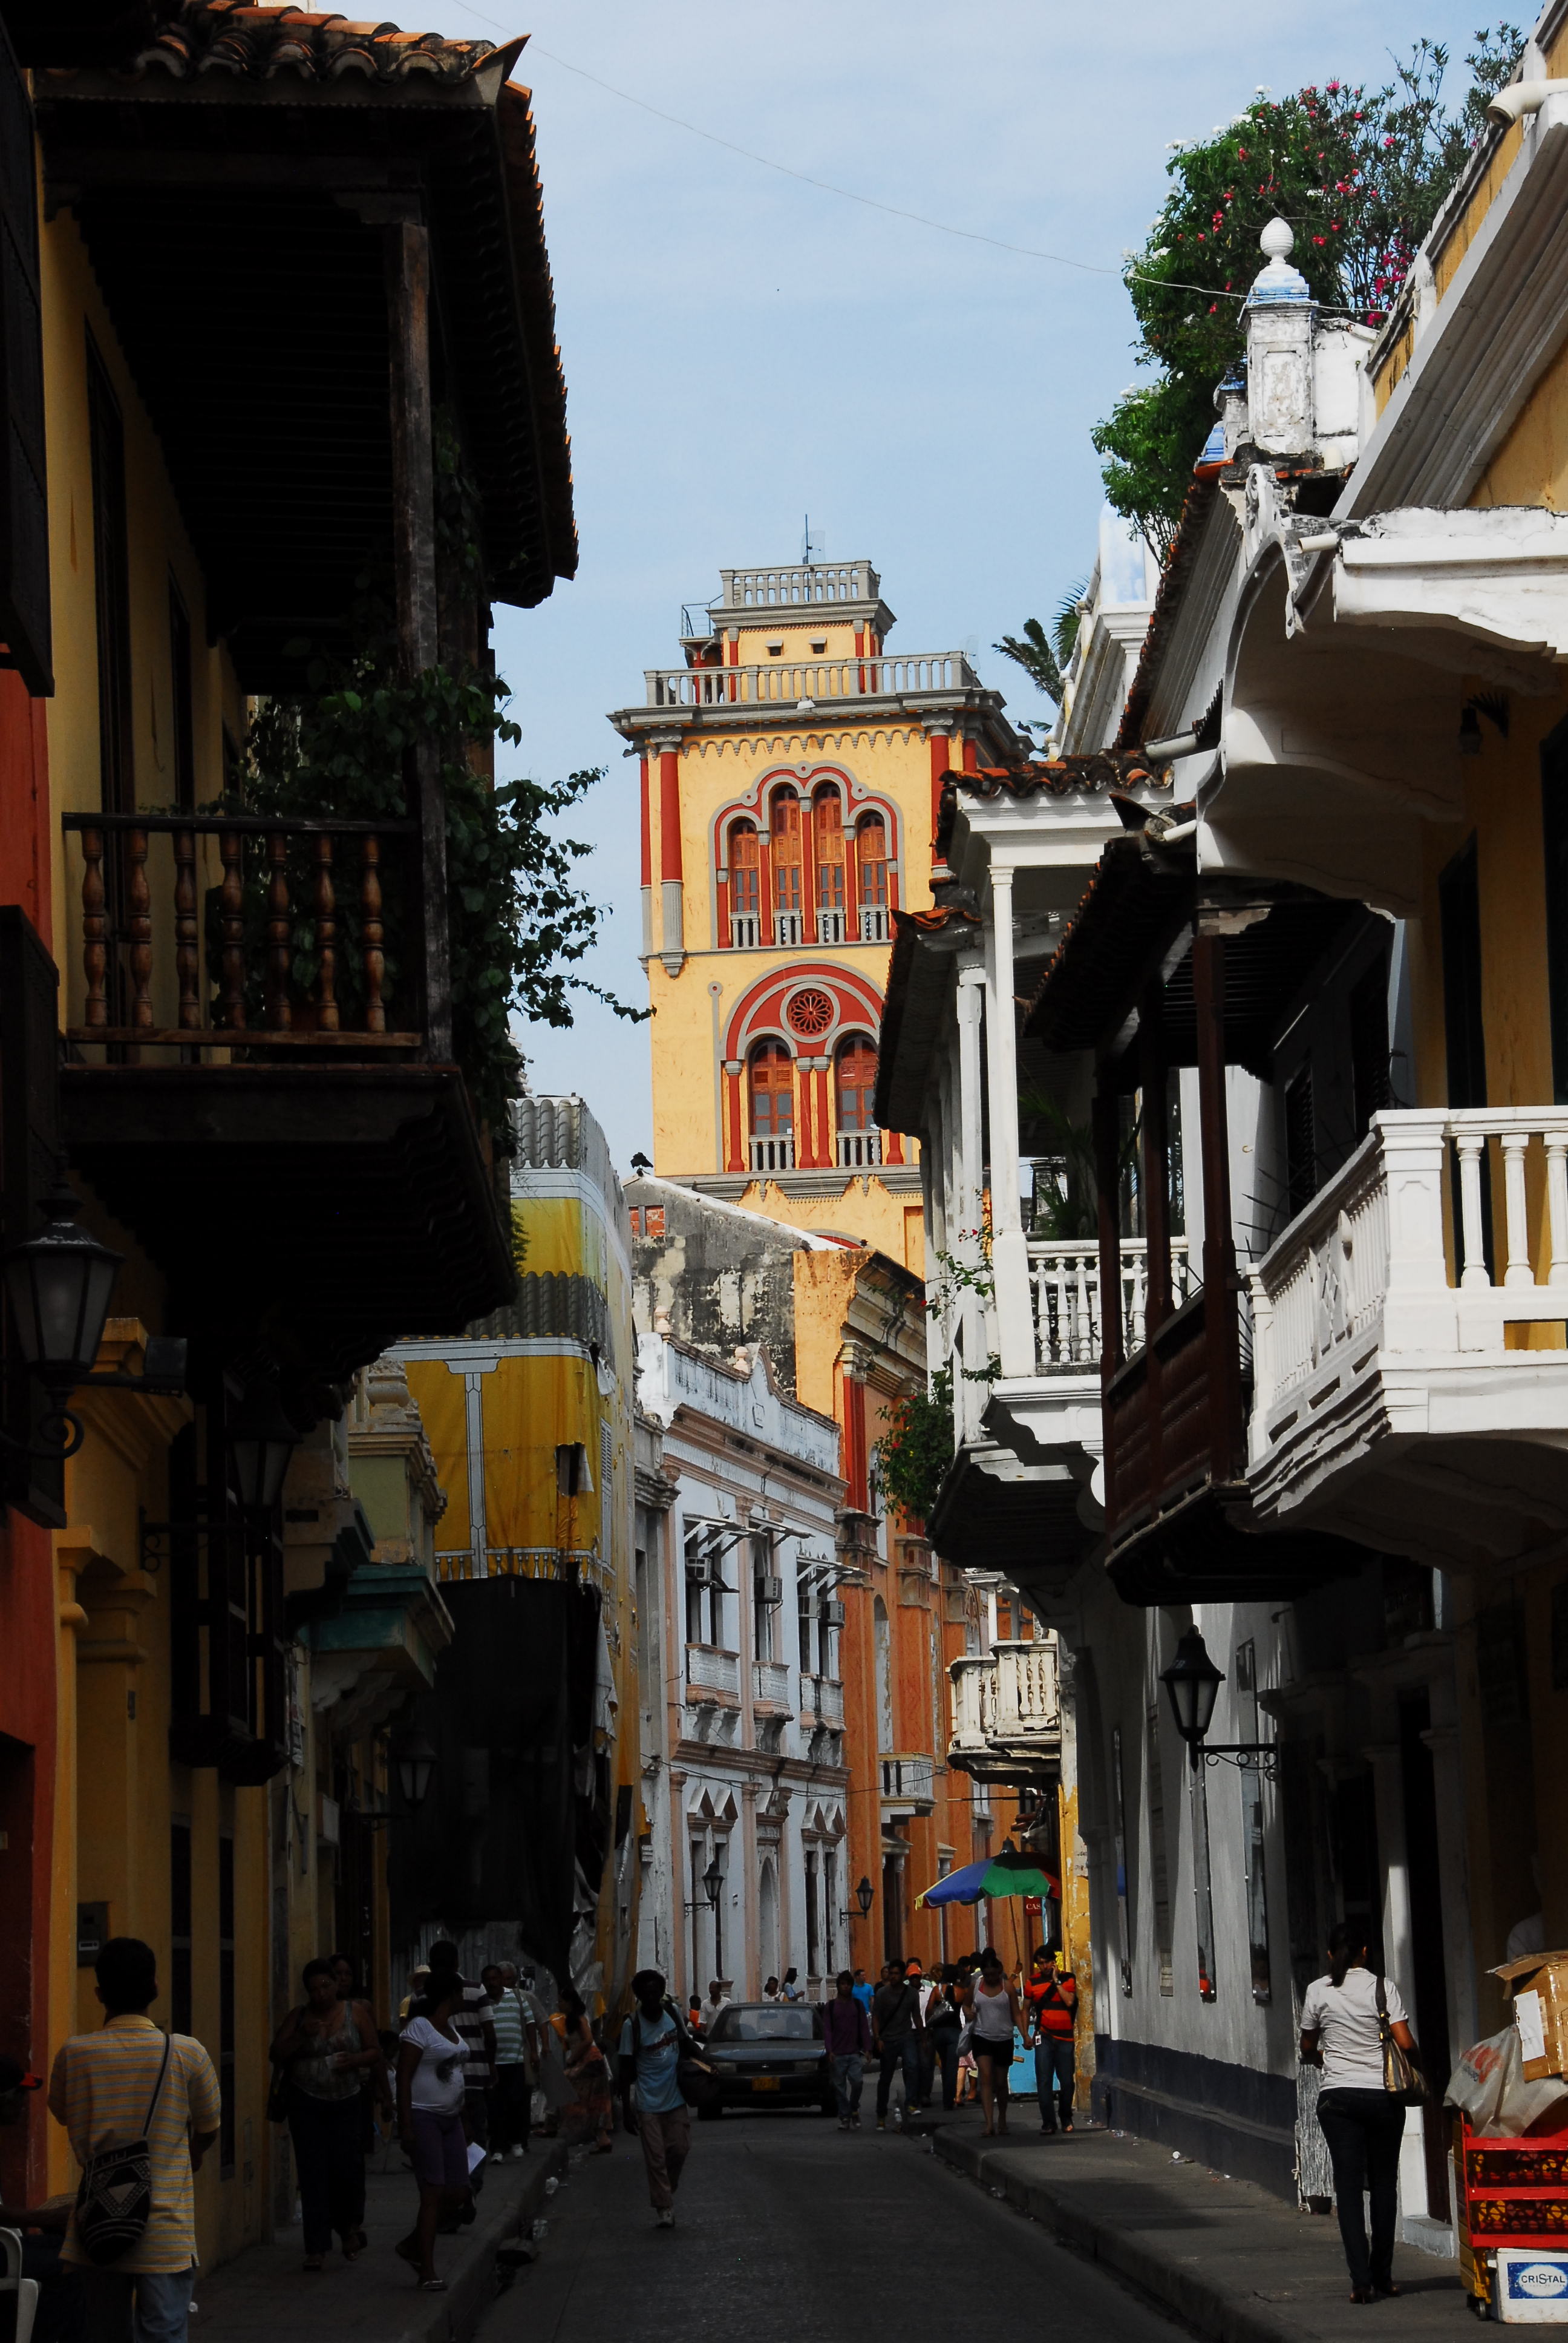 Every corner in Old Town Cartagena yields a lovely scene.